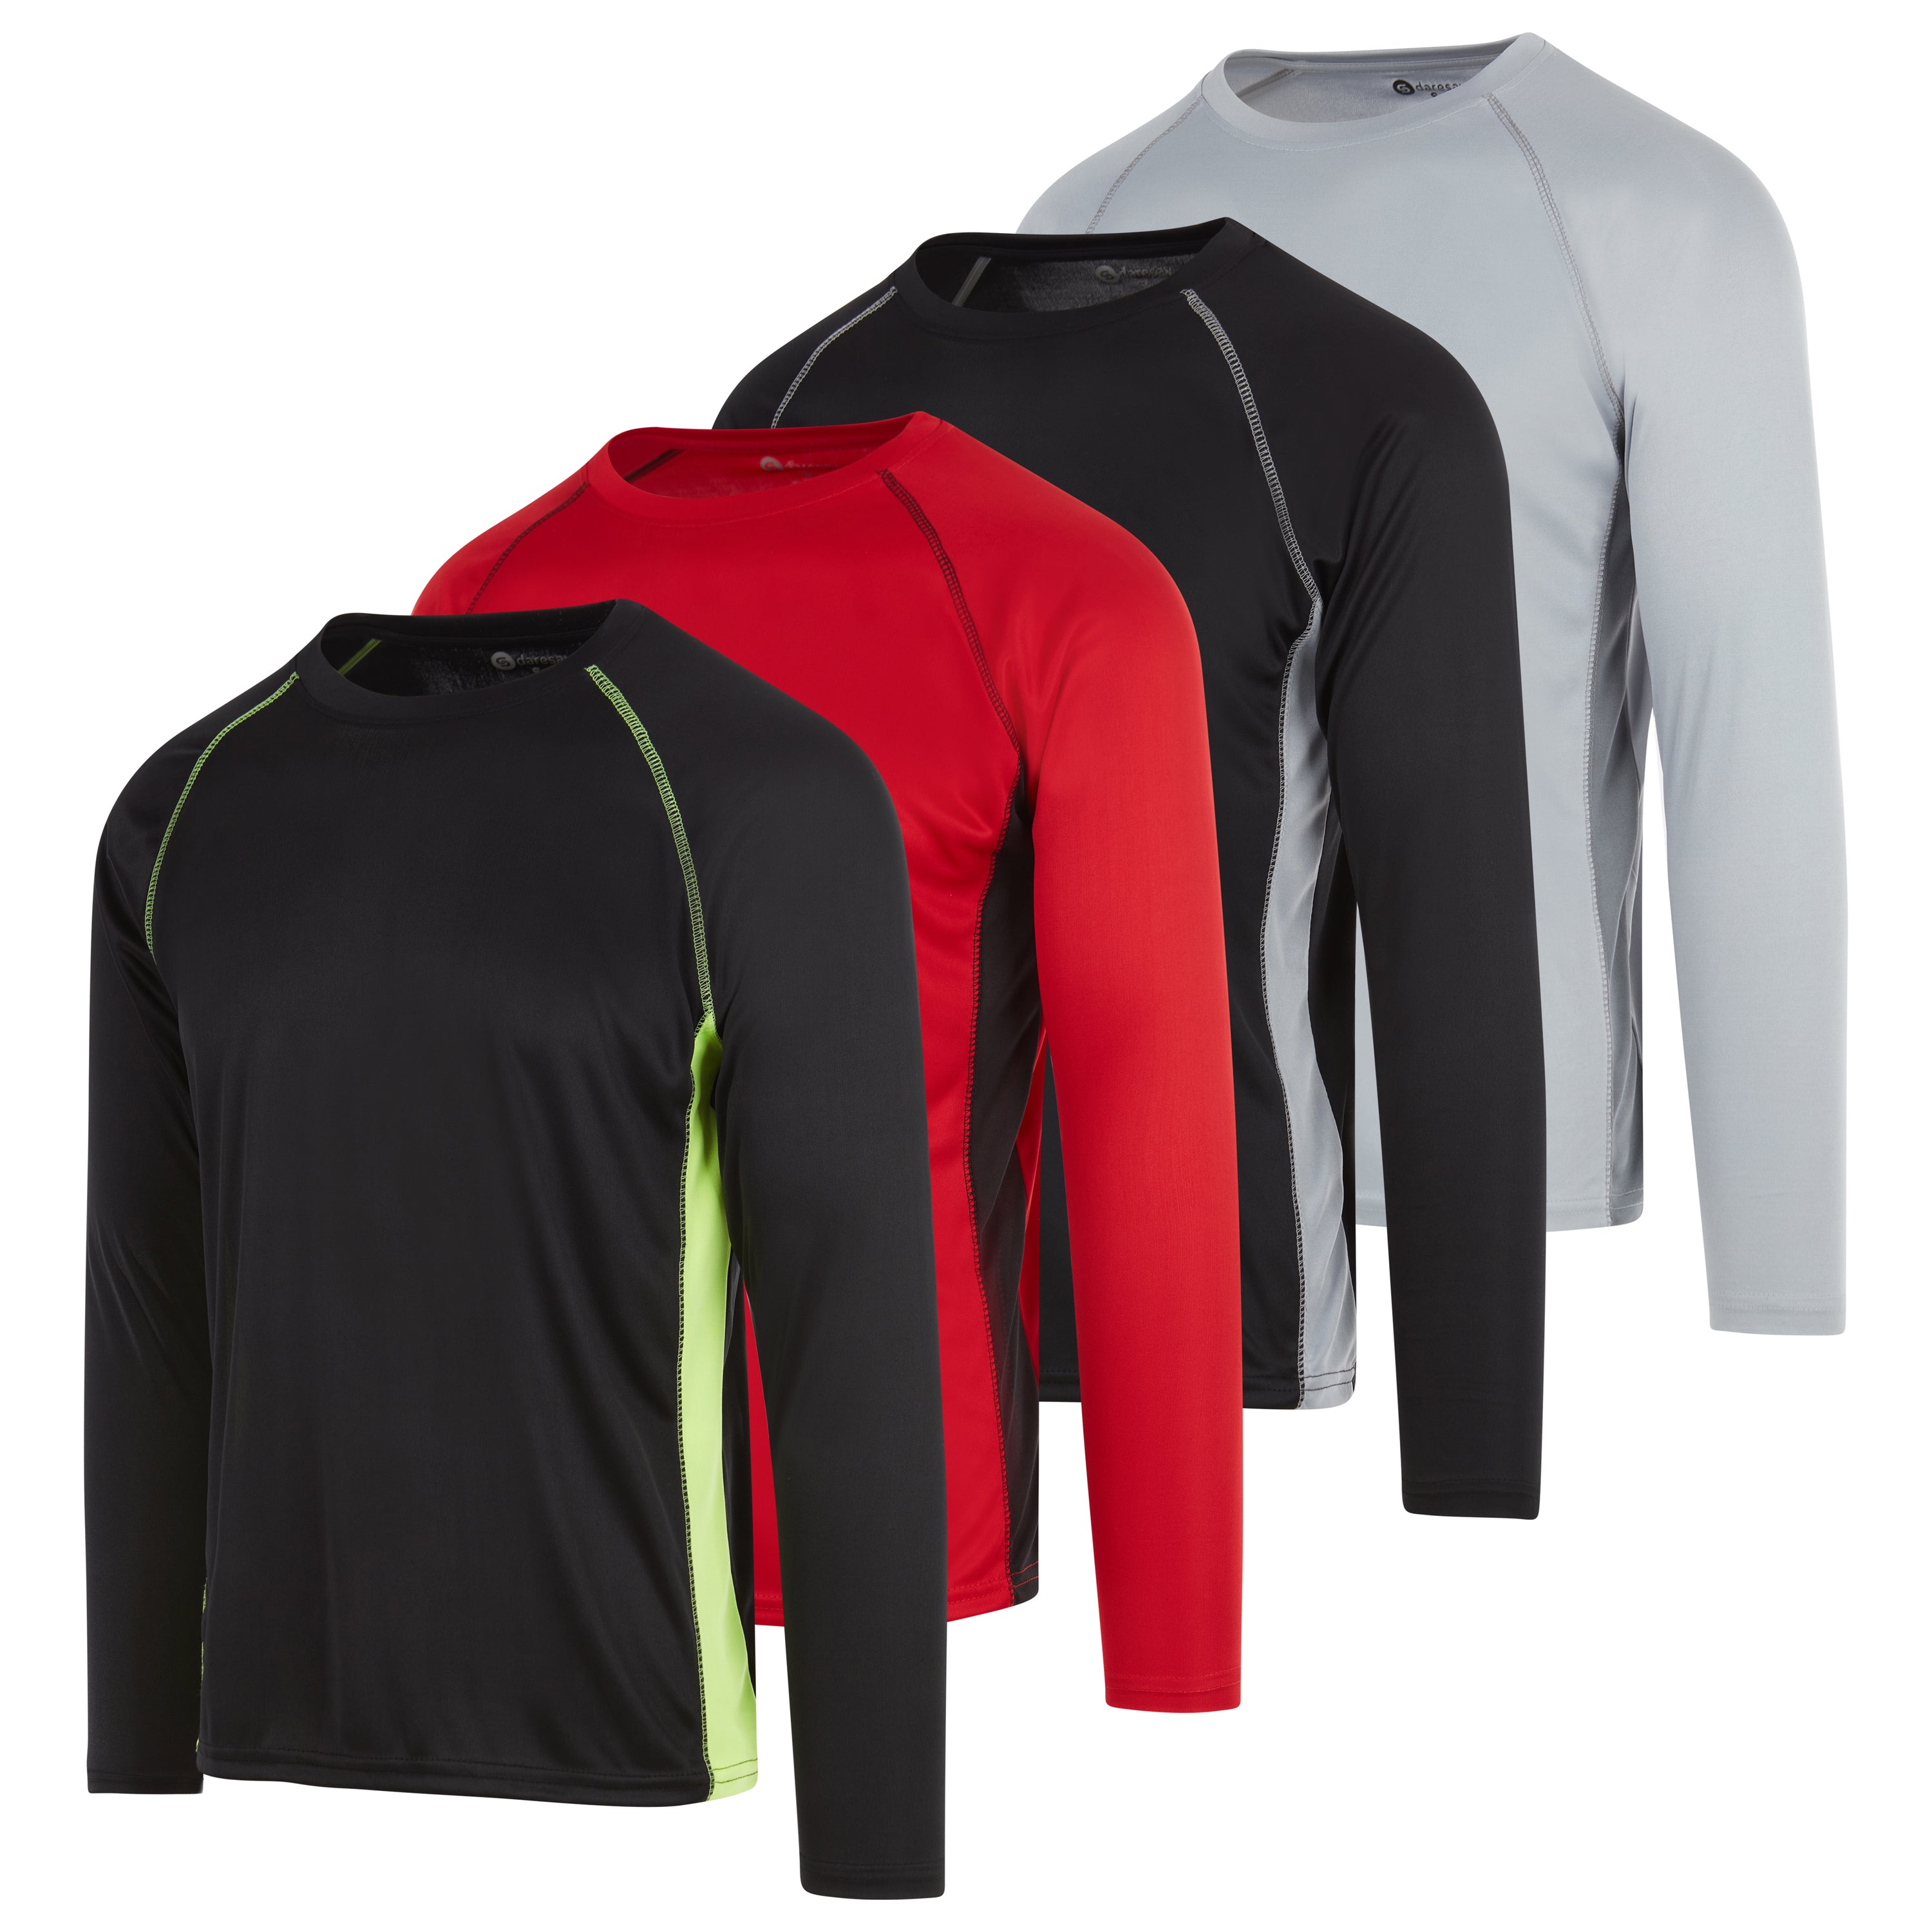 DARESAY Dri-Fit Long Sleeve T Shirts for Men-4 Pack- Moisture Wicking,  Quick Dry Tees Classic Unique Breathable Mens Shirt